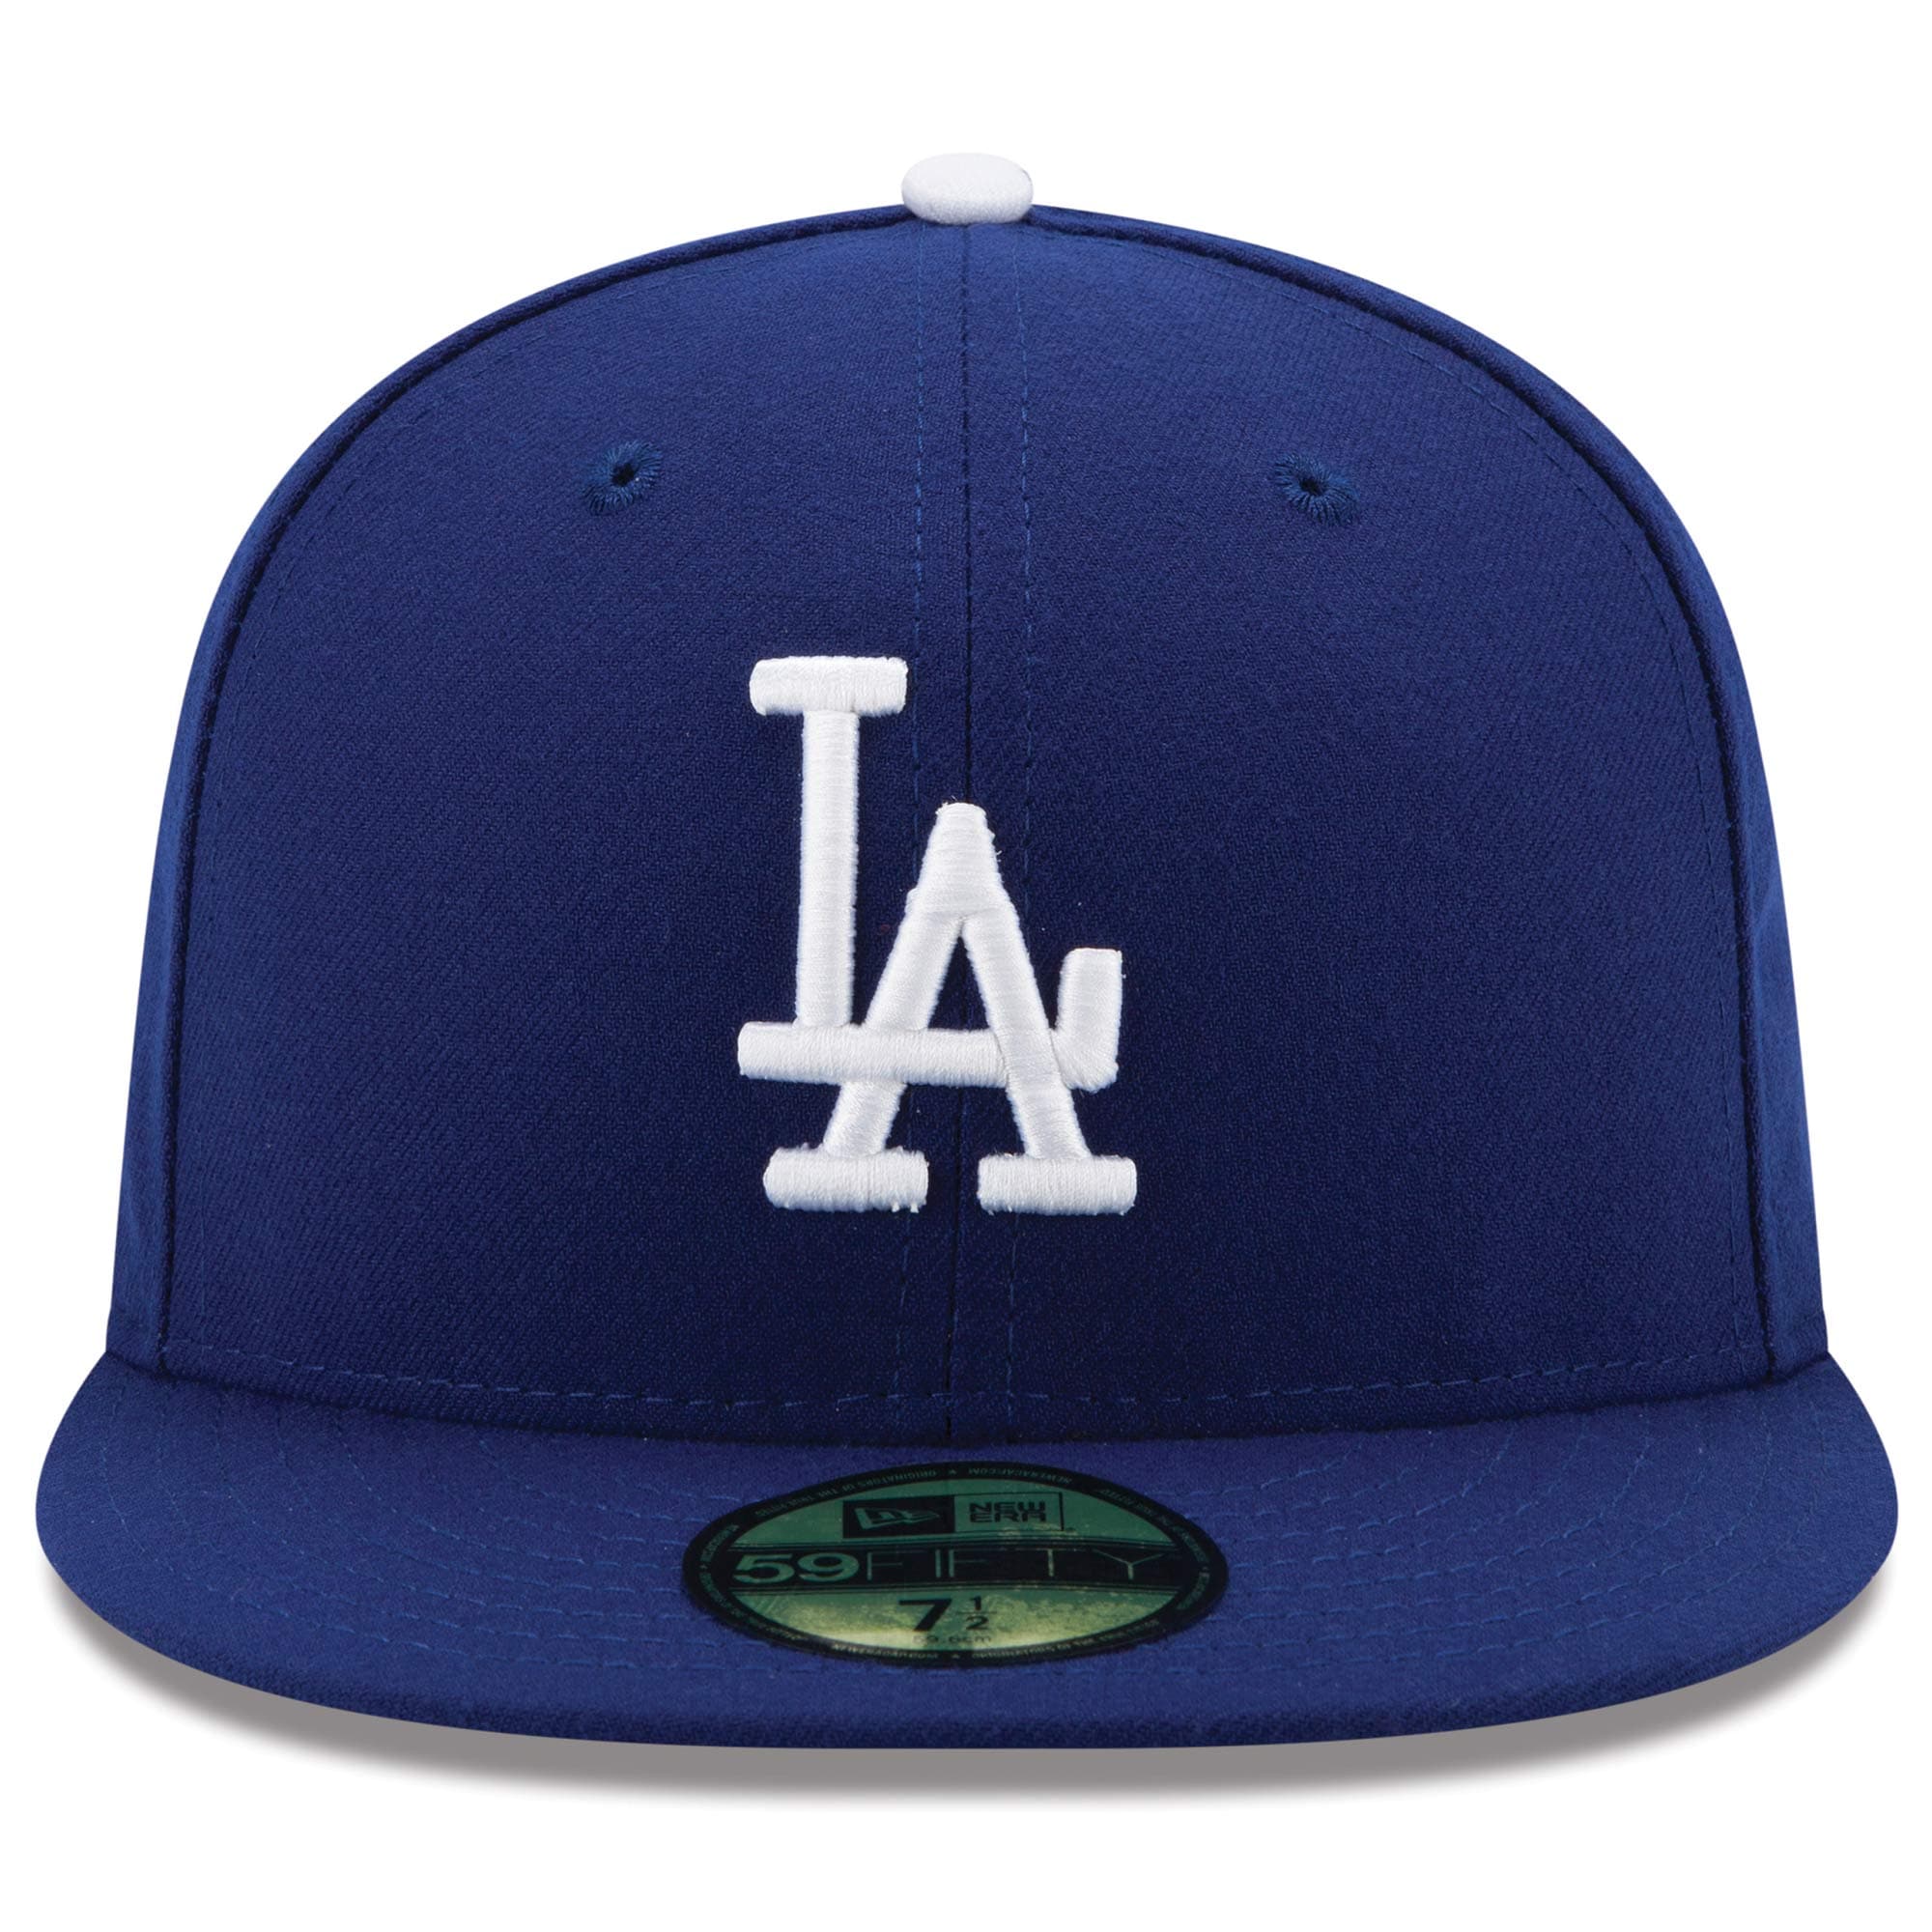 Men's New Era Royal Los Angeles Dodgers Authentic Collection On Field 59FIFTY Performance Fitted Hat - image 2 of 5